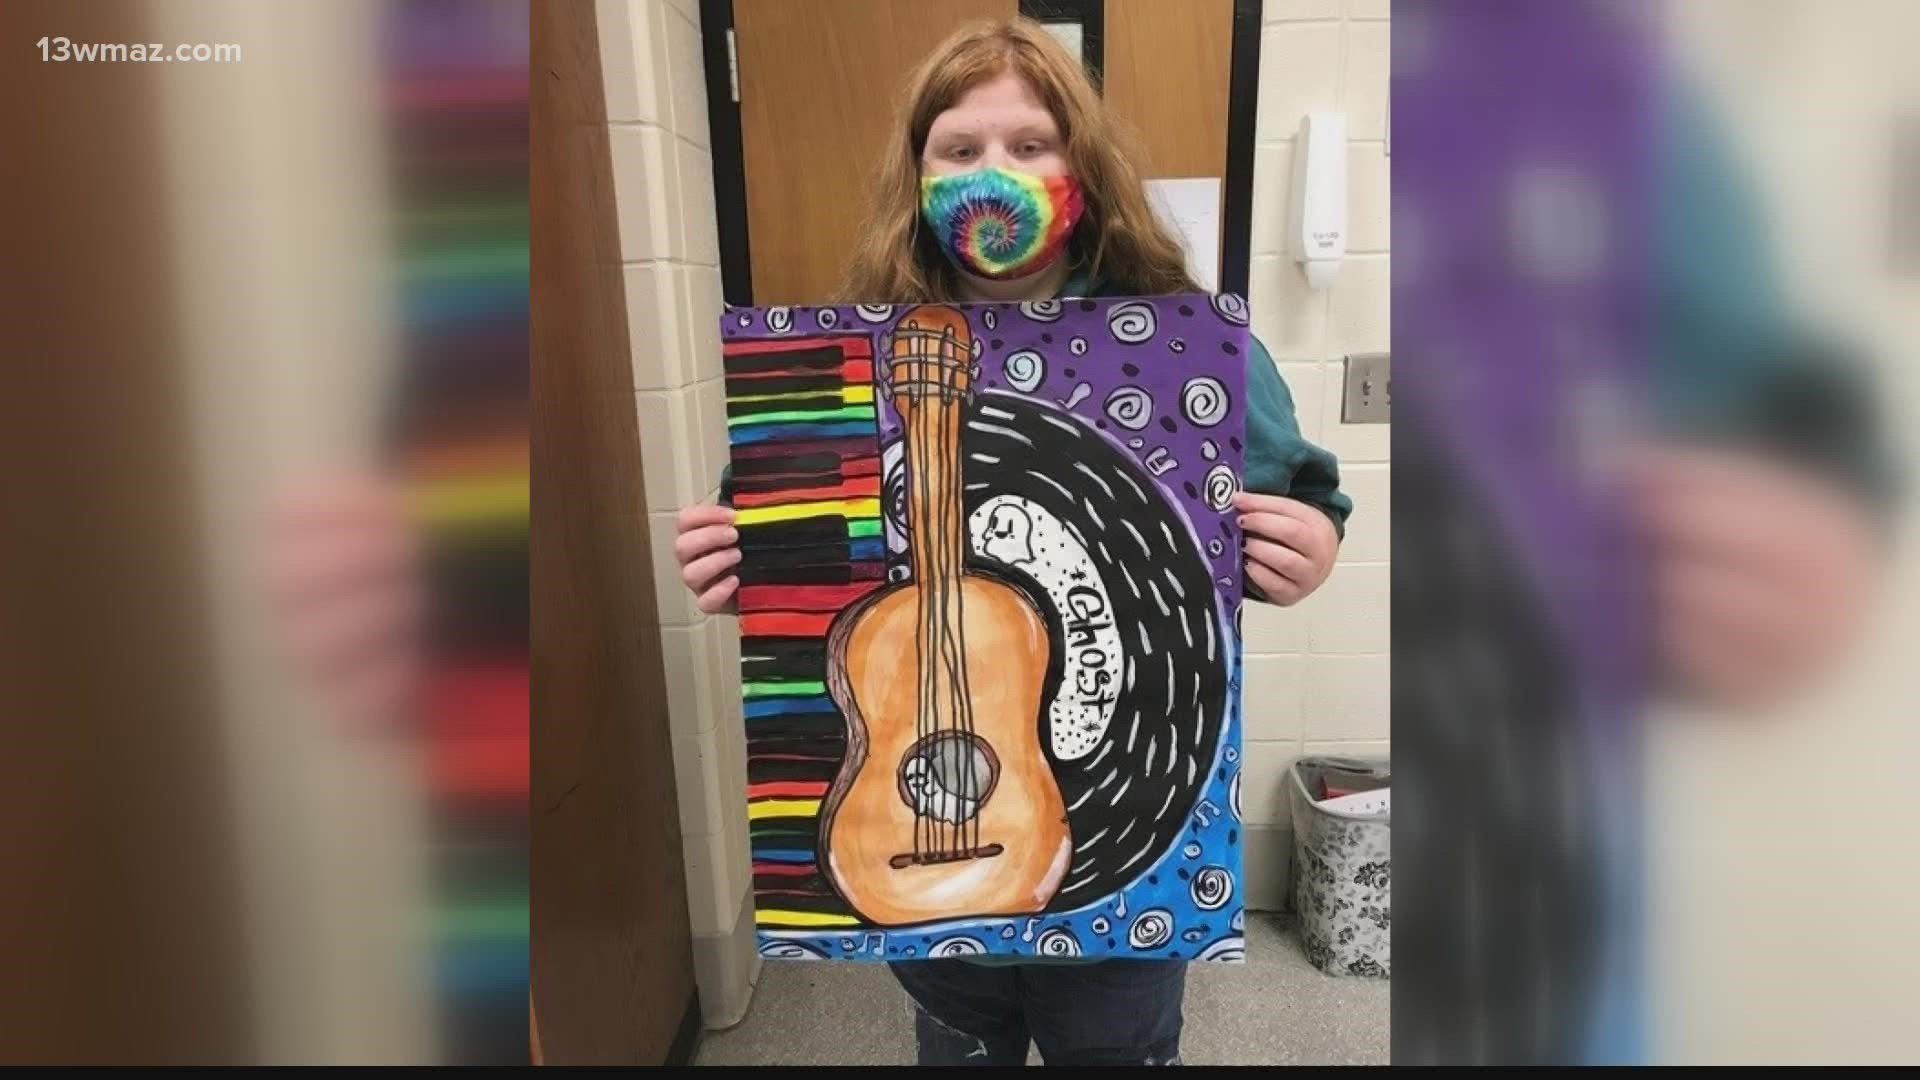 A group of Twiggs county students not only got to create magic through their artwork, but many people will soon get to see their work.